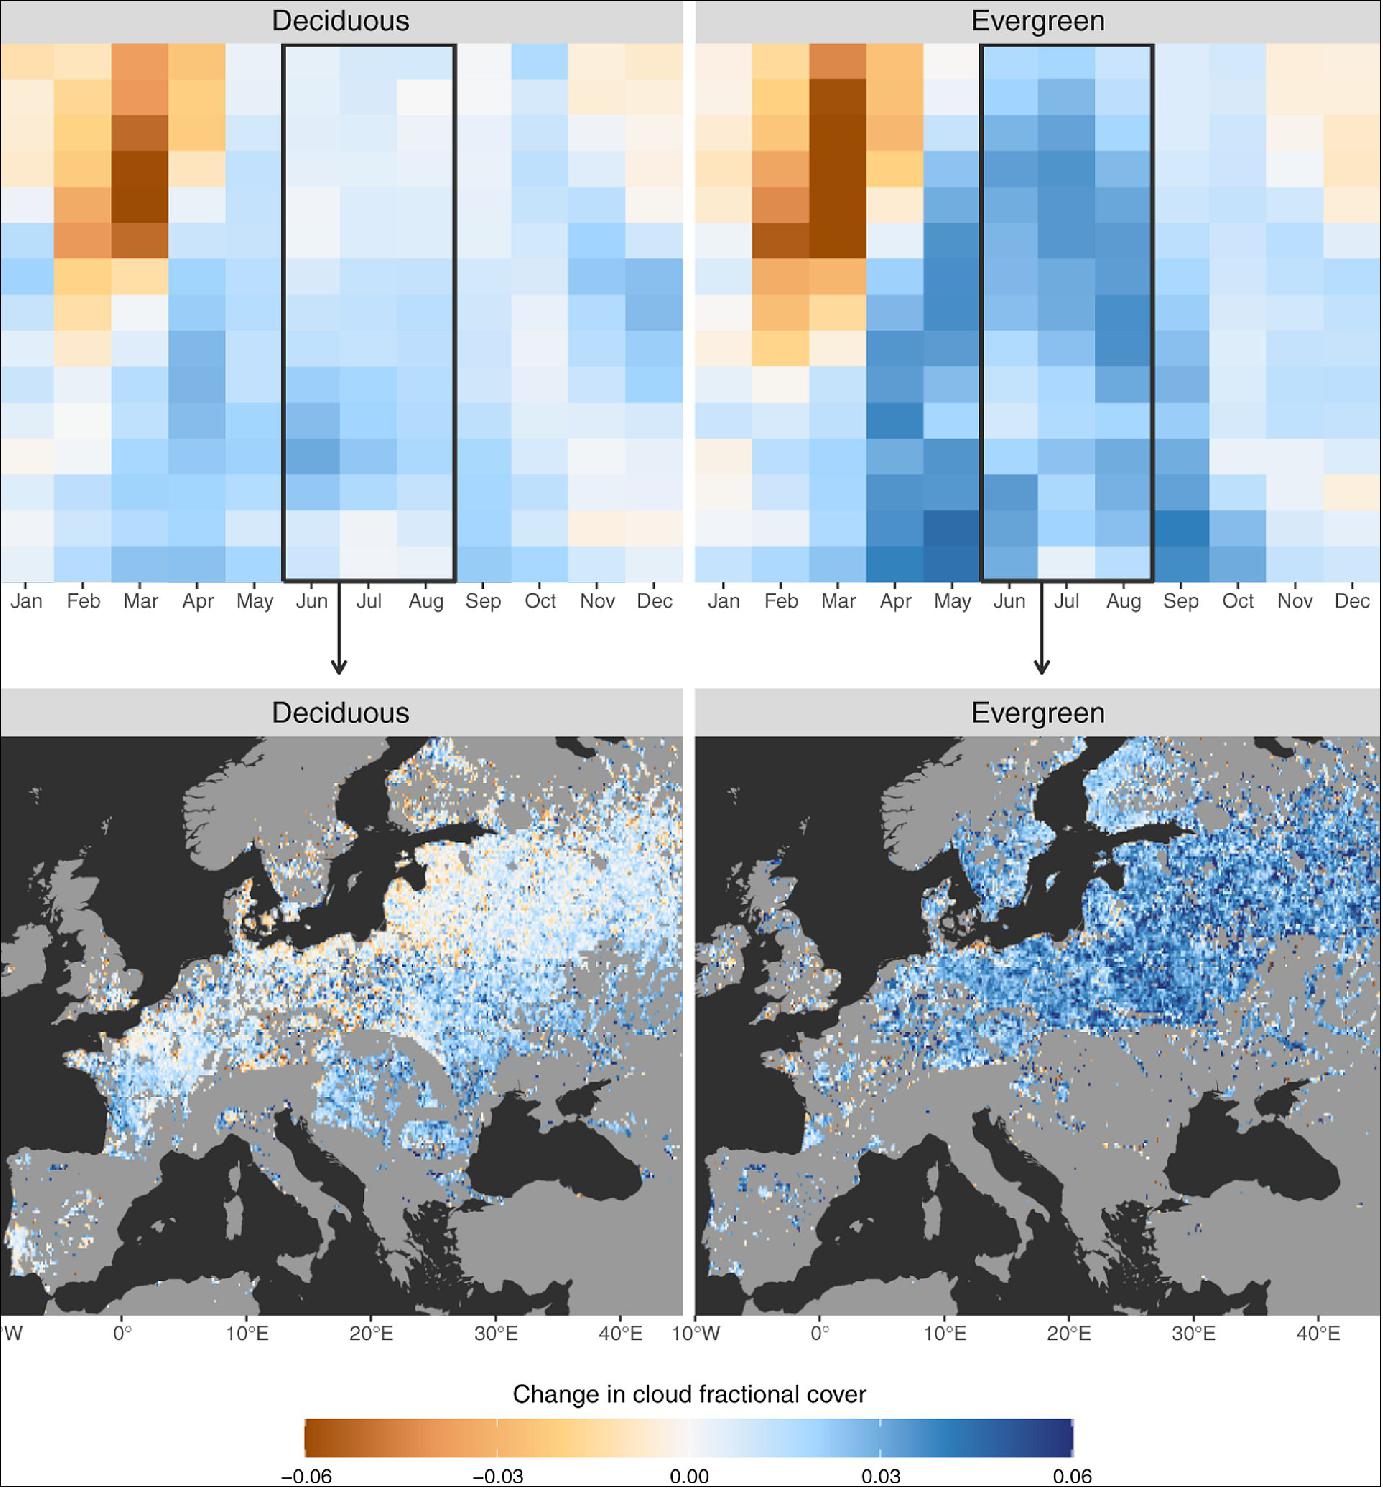 Figure 10: The effect of afforestation on fractional cloud cover for different forest types. A first global assessment using satellite observations shows that for two-thirds of the world, afforestation increases low-level cloud cover, with the effect being strongest over evergreen needleleaf forest (image credit: ESA)